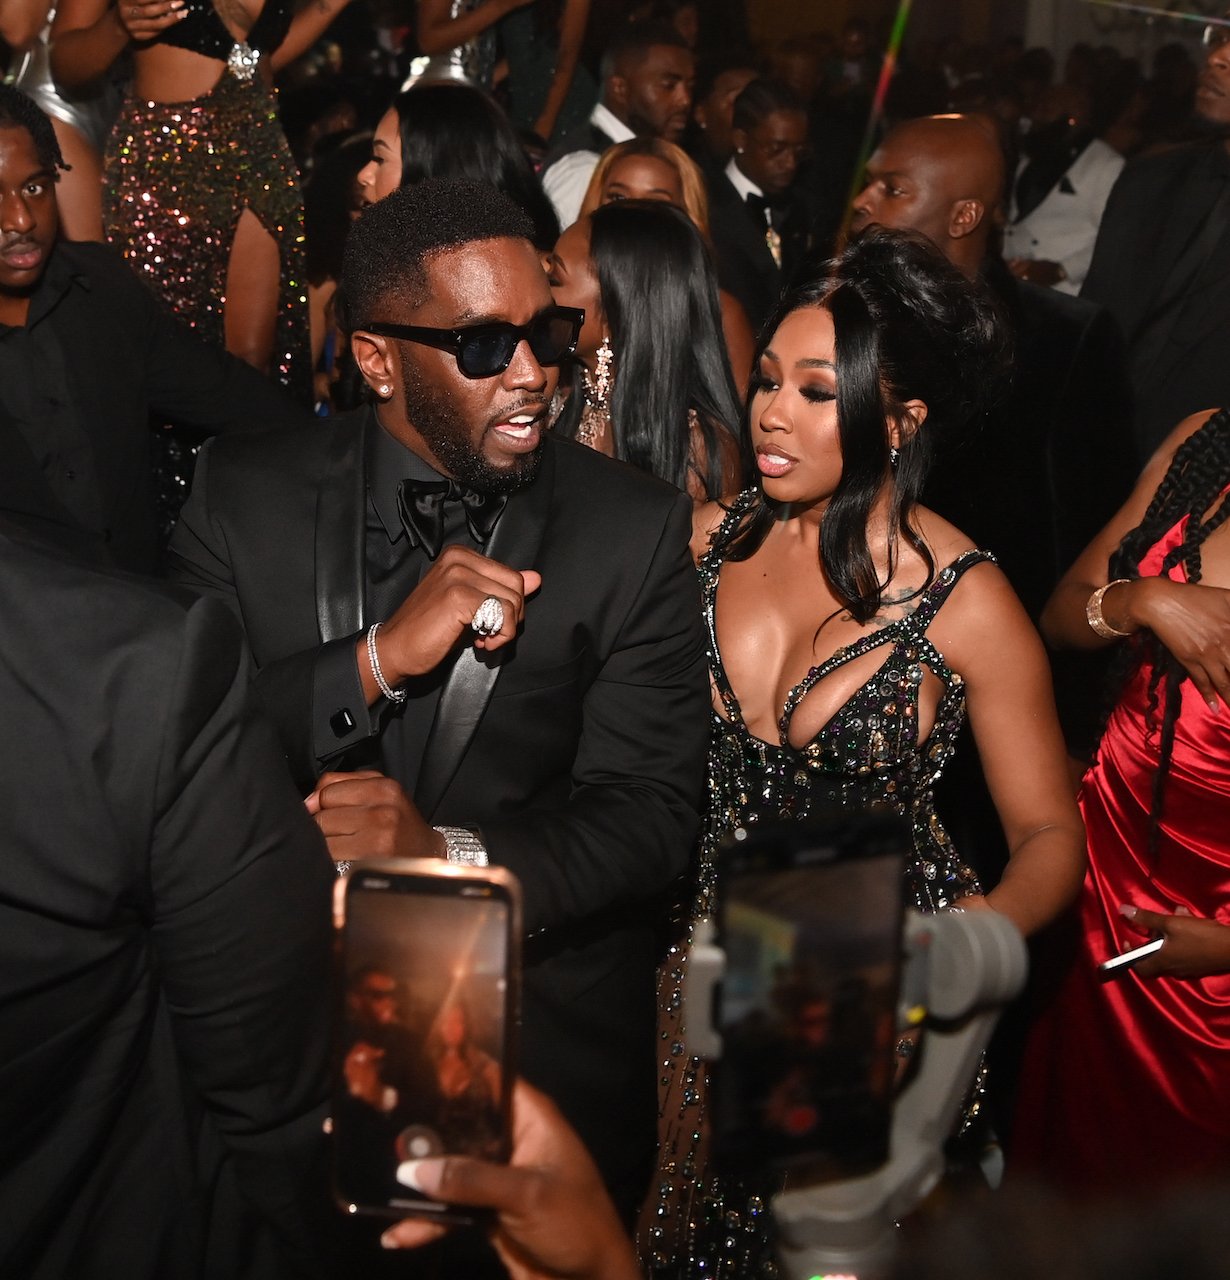 Diddy and Yung Miami party together; Miami says she and Diddy are dating but single